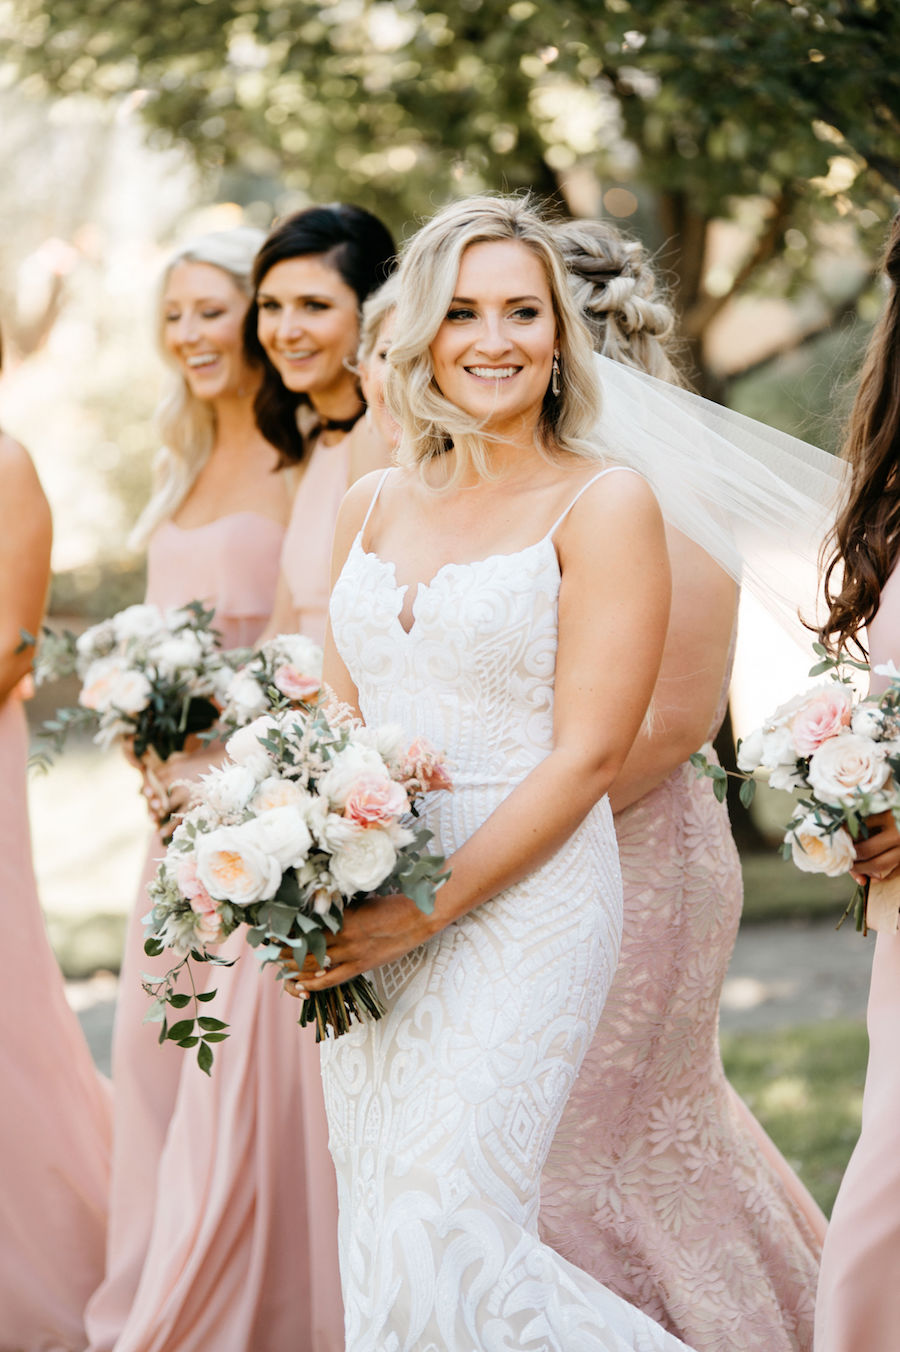 Romantic Pastel Tuscan Inspired Wedding Featured on Strictly Weddings42.jpg